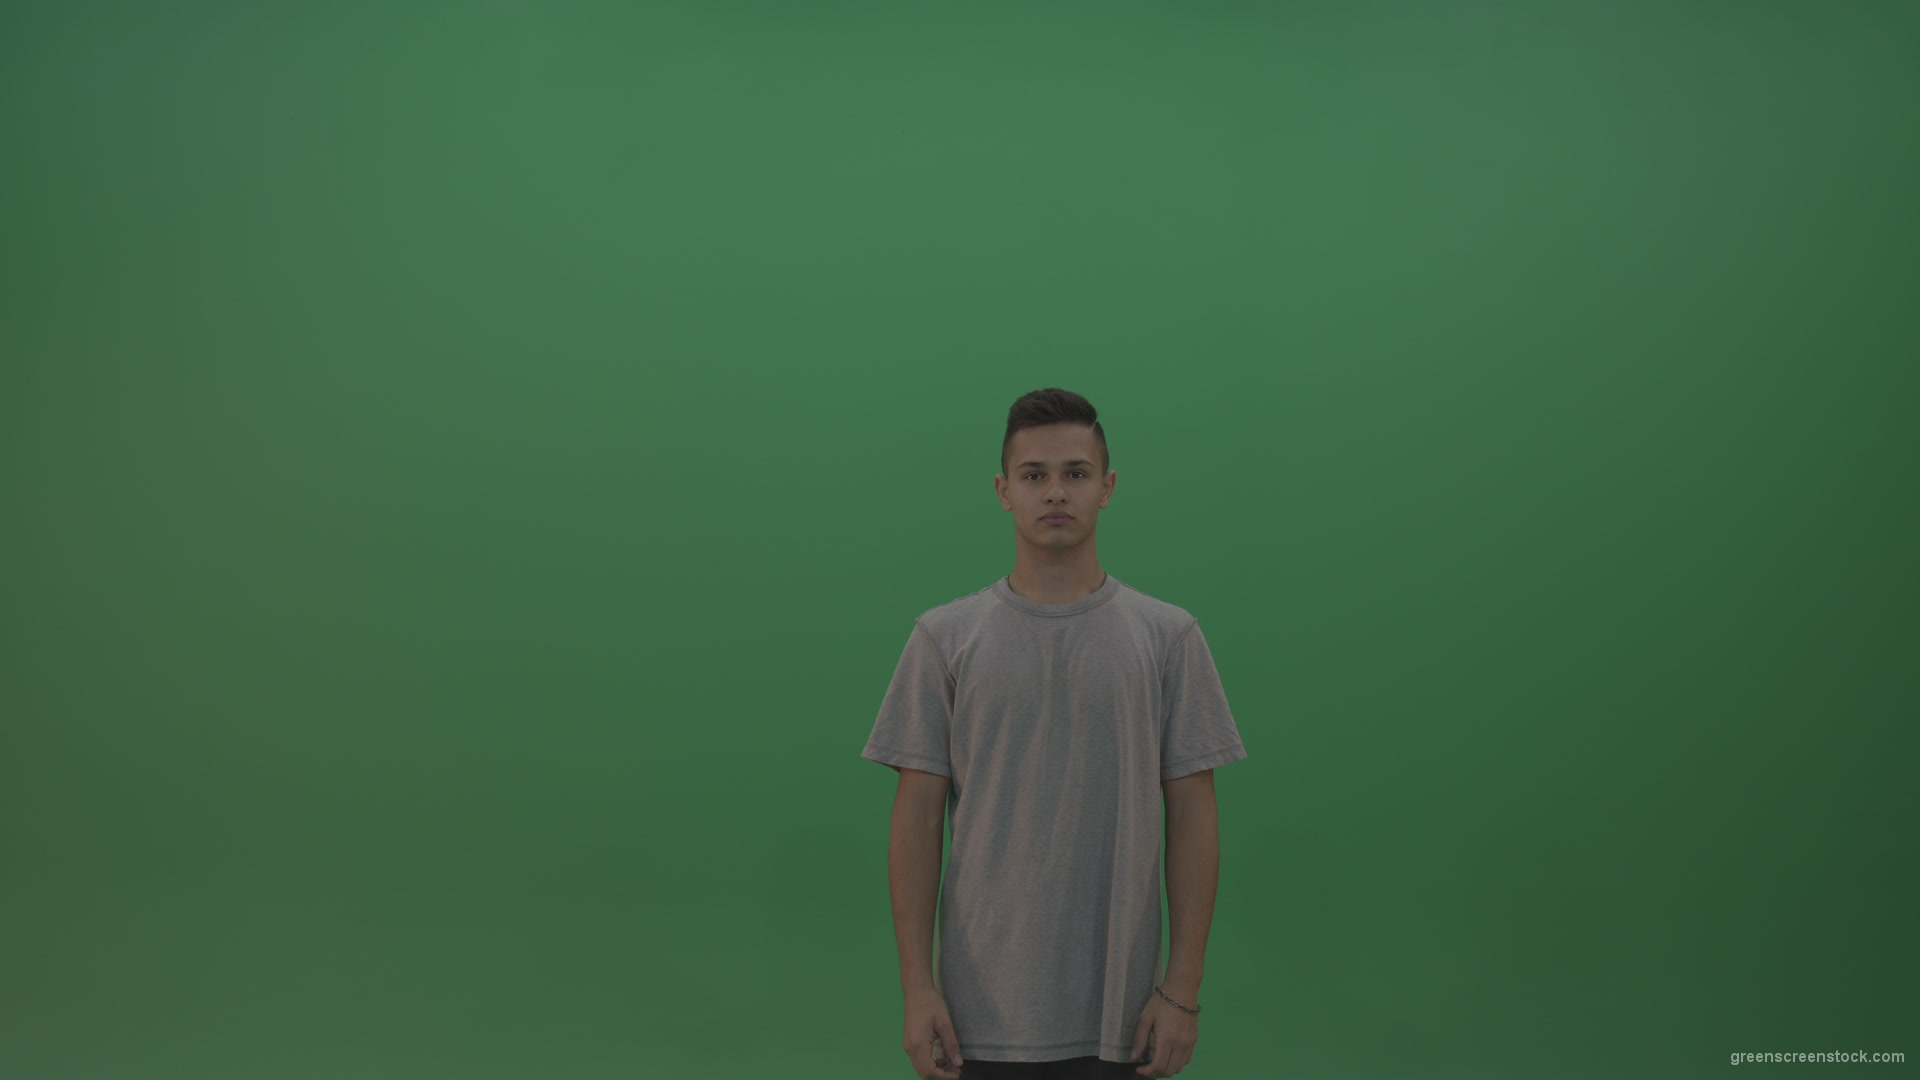 Boy-in-grey-wear-expresses-approval-by-giving-thumbs-up-over-green-screen-background_001 Green Screen Stock